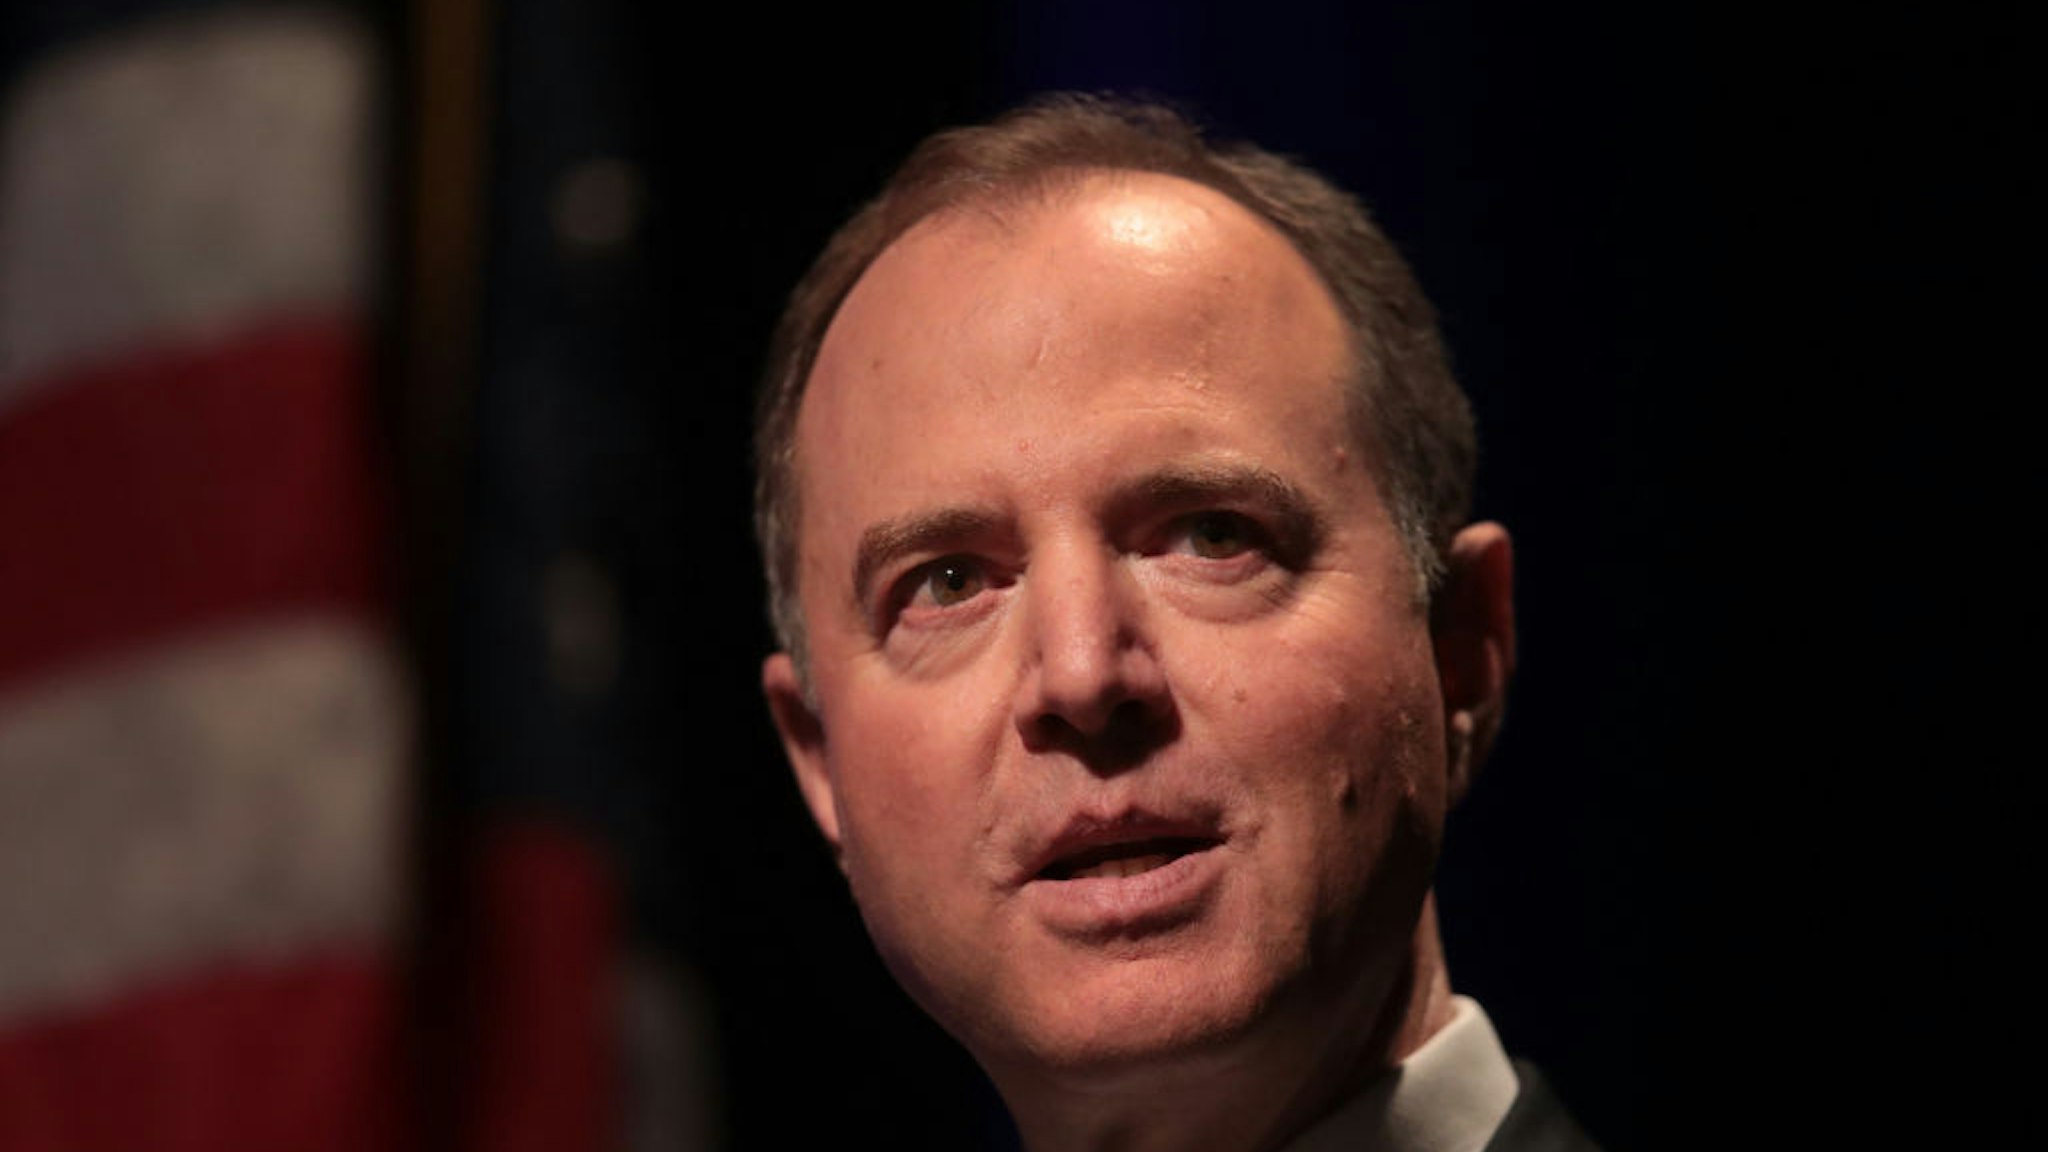 Rep. Adam Schiff (D-CA) delivers a lecture on The Threat to Liberal Democracy at Home and Abroad at Cahn Auditorium on the campus of Northwestern University on October 03, 2019 in Chicago, Illinois.